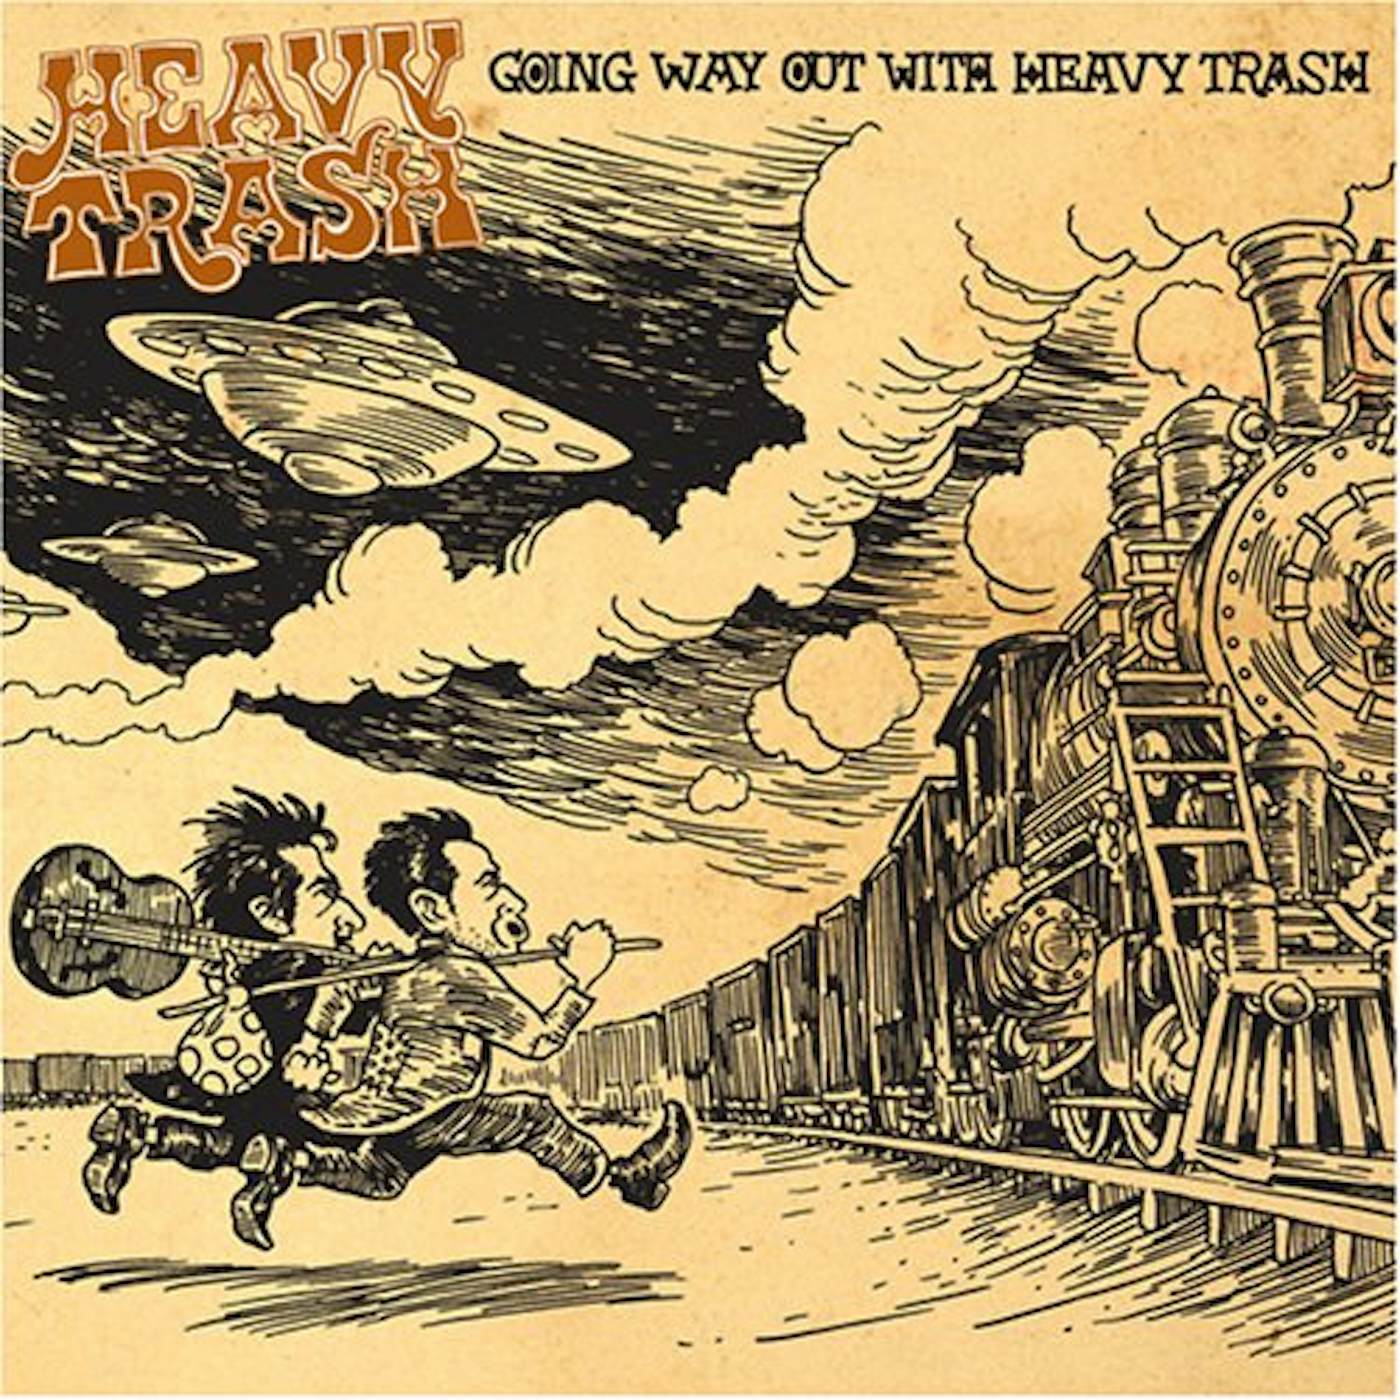 GOING WAY OUT WITH HEAVY TRASH (BONUS TRACKS) Vinyl Record